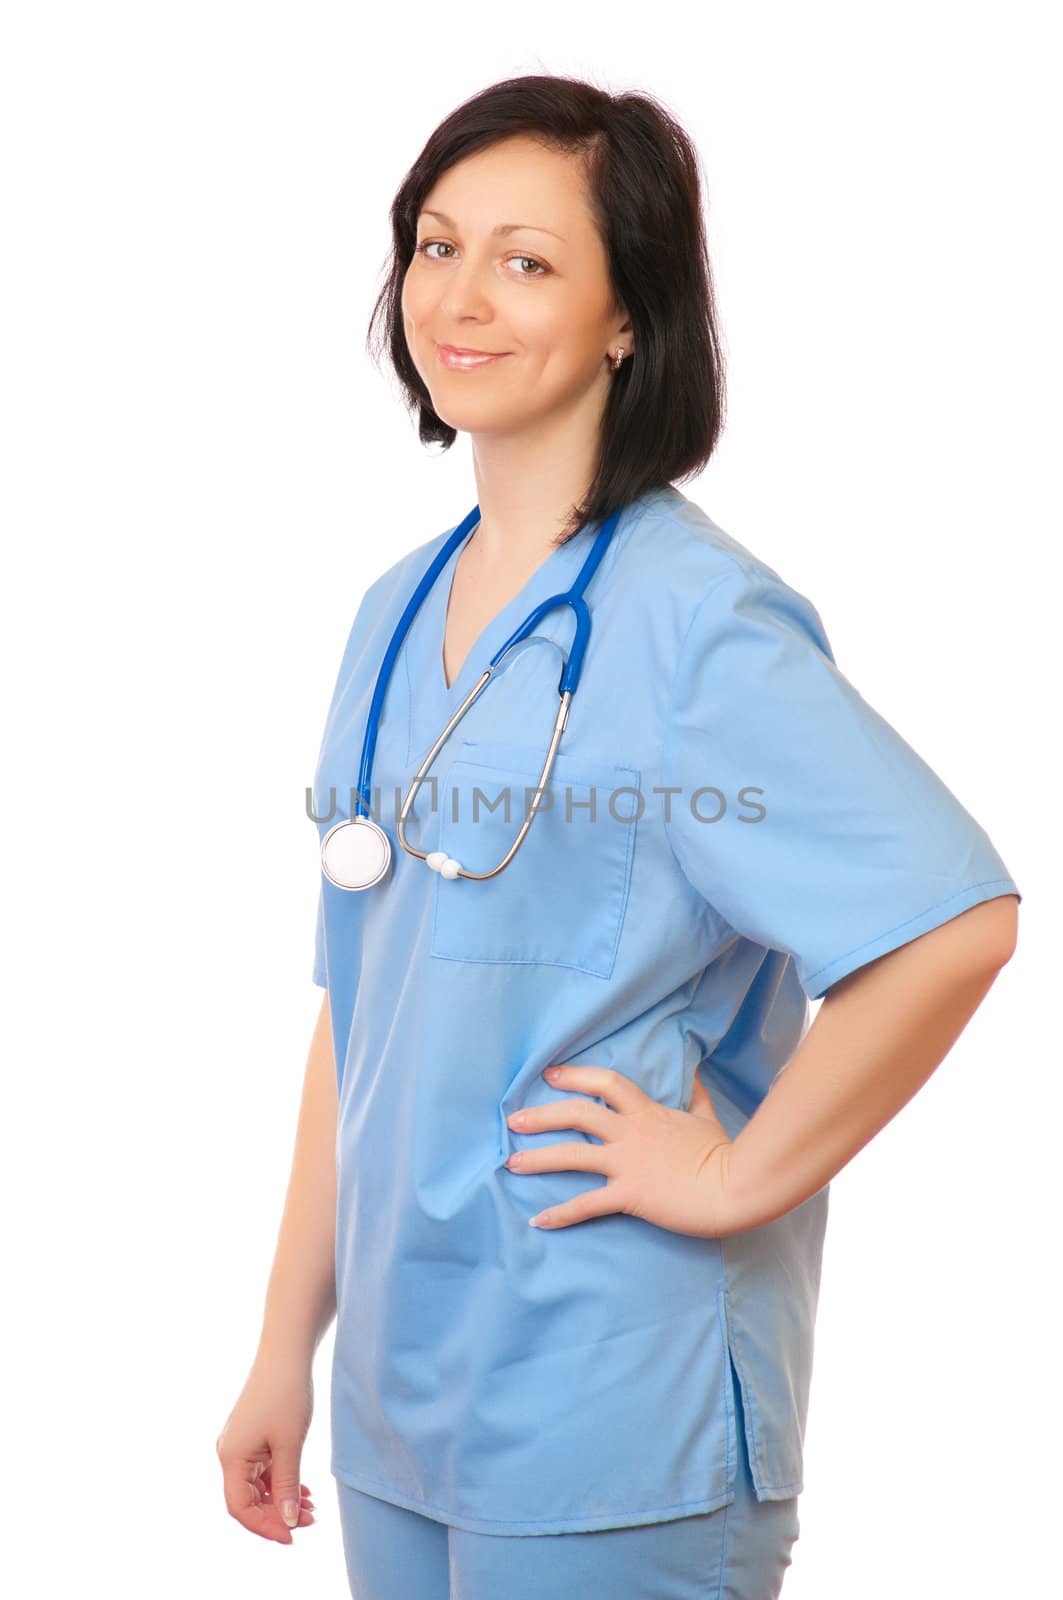 Young smiling doctor isolated on white